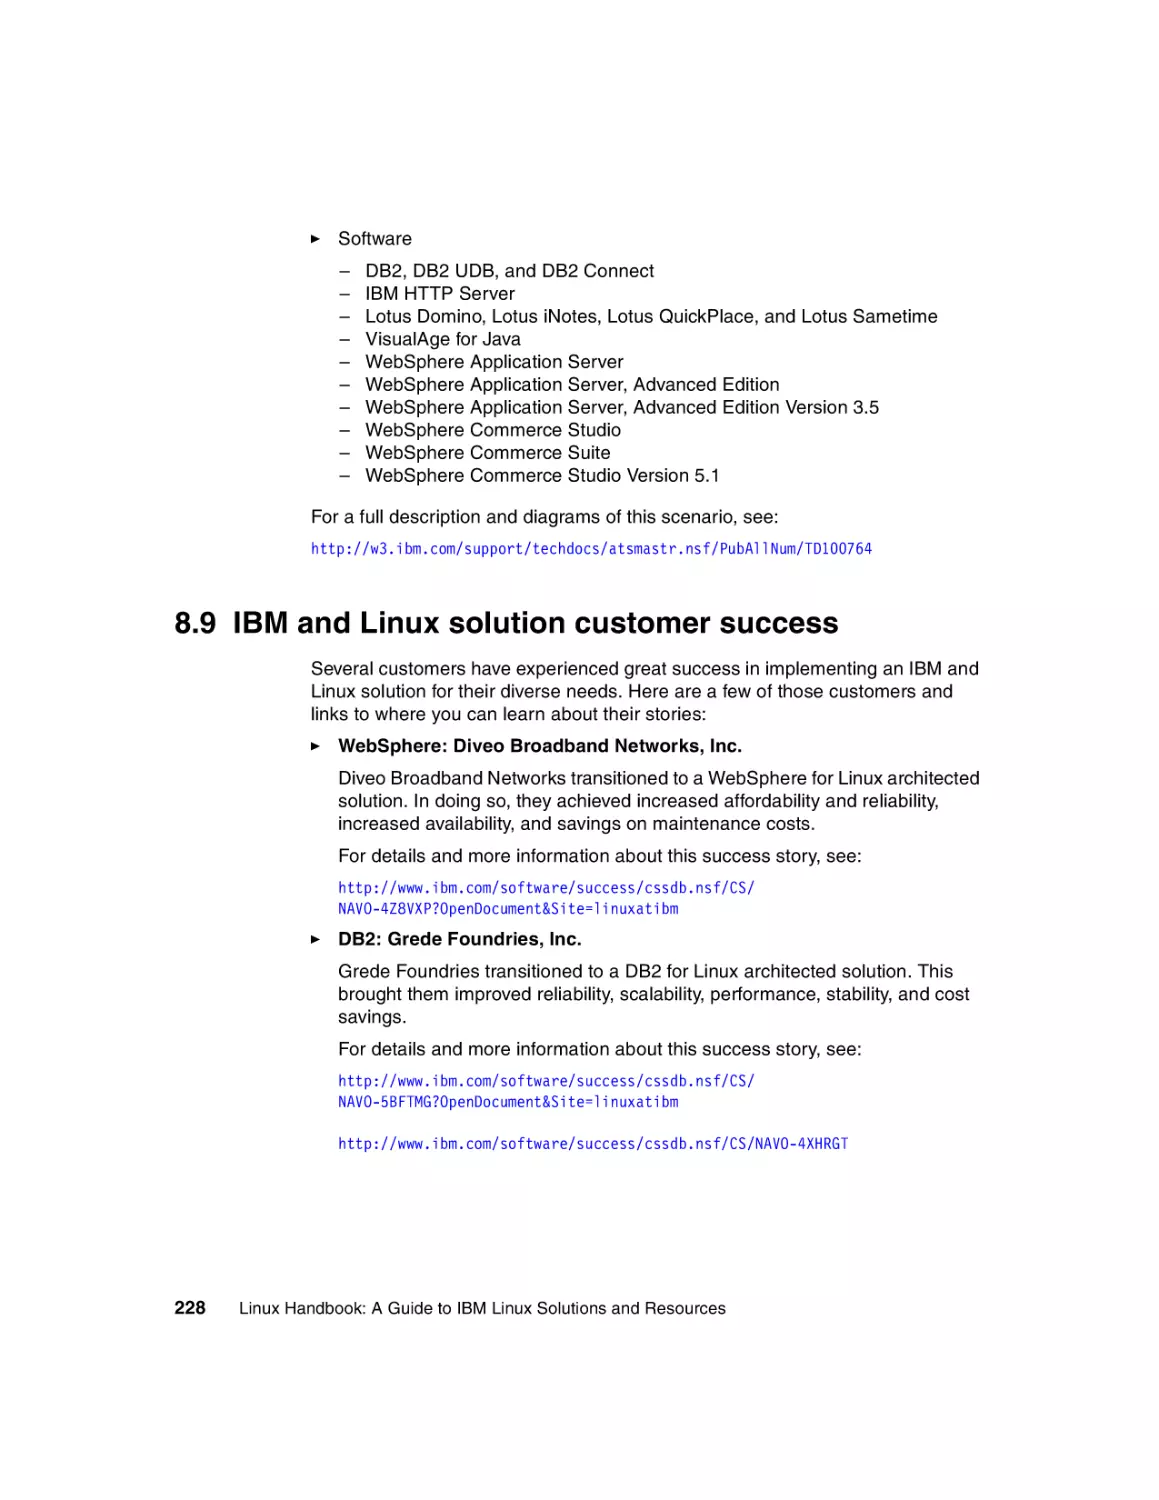 8.9 IBM and Linux solution customer success